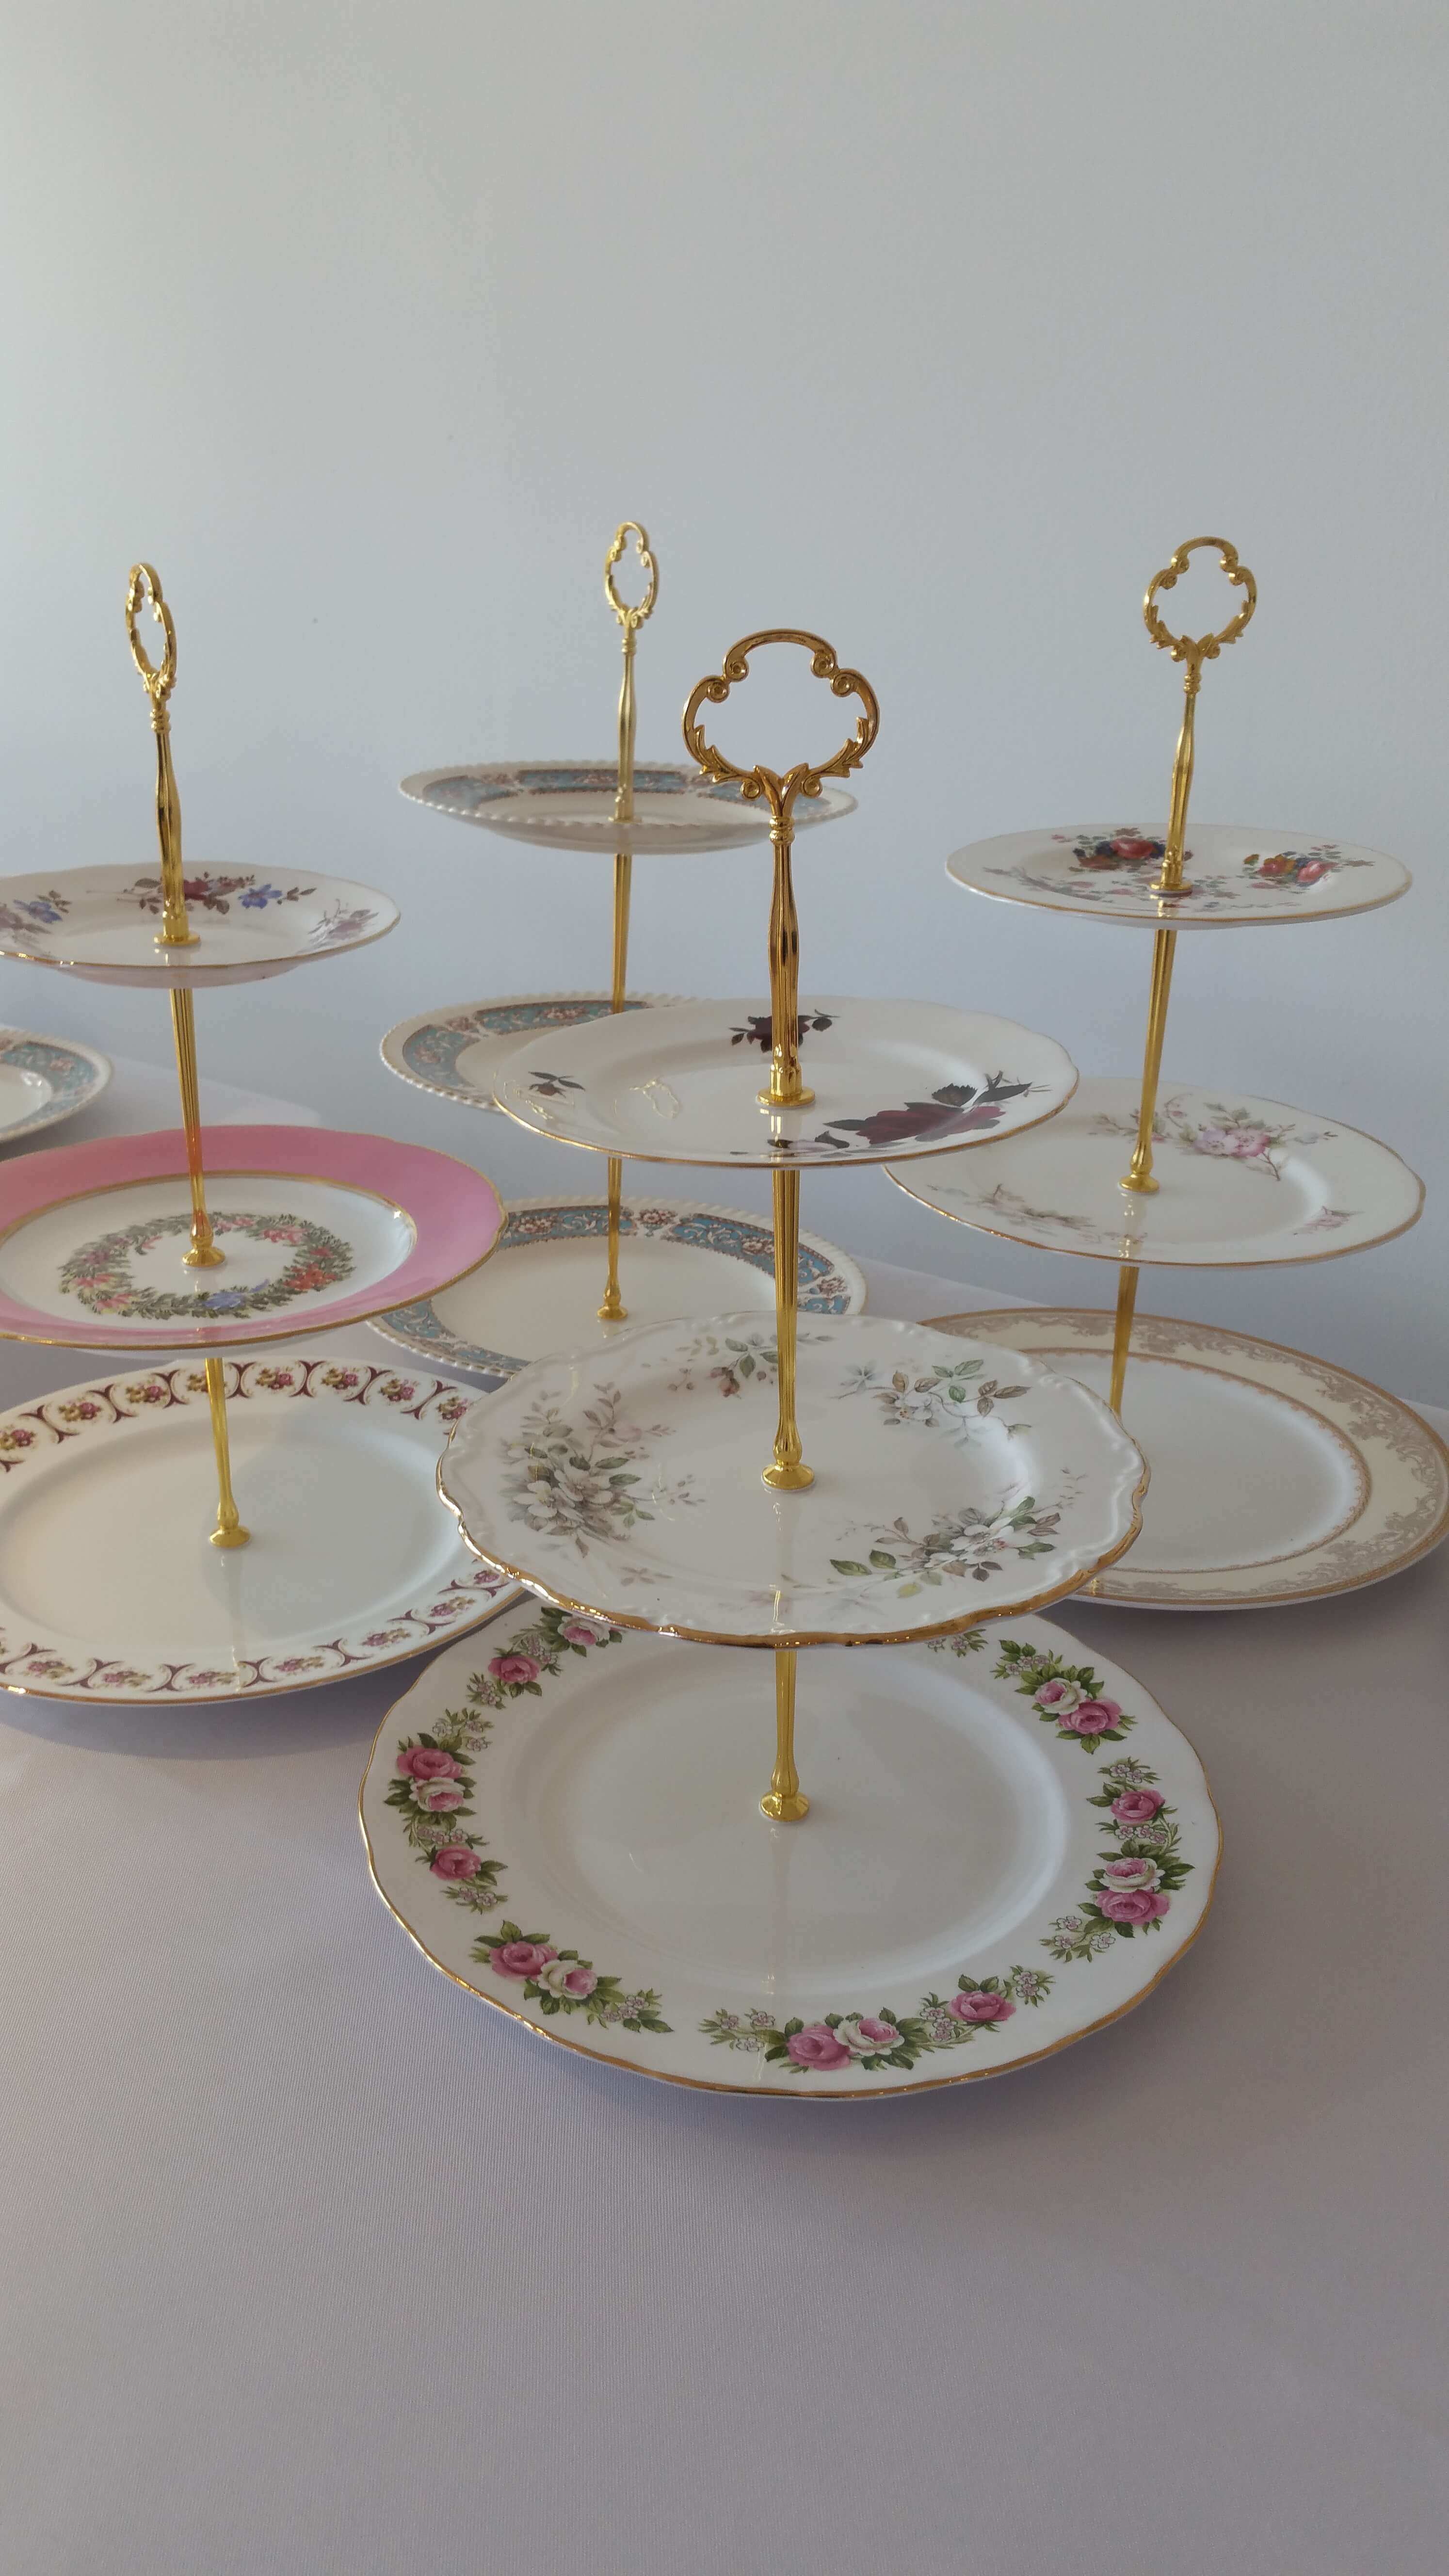 A photo showing a selection of our Vintage Cake Stands